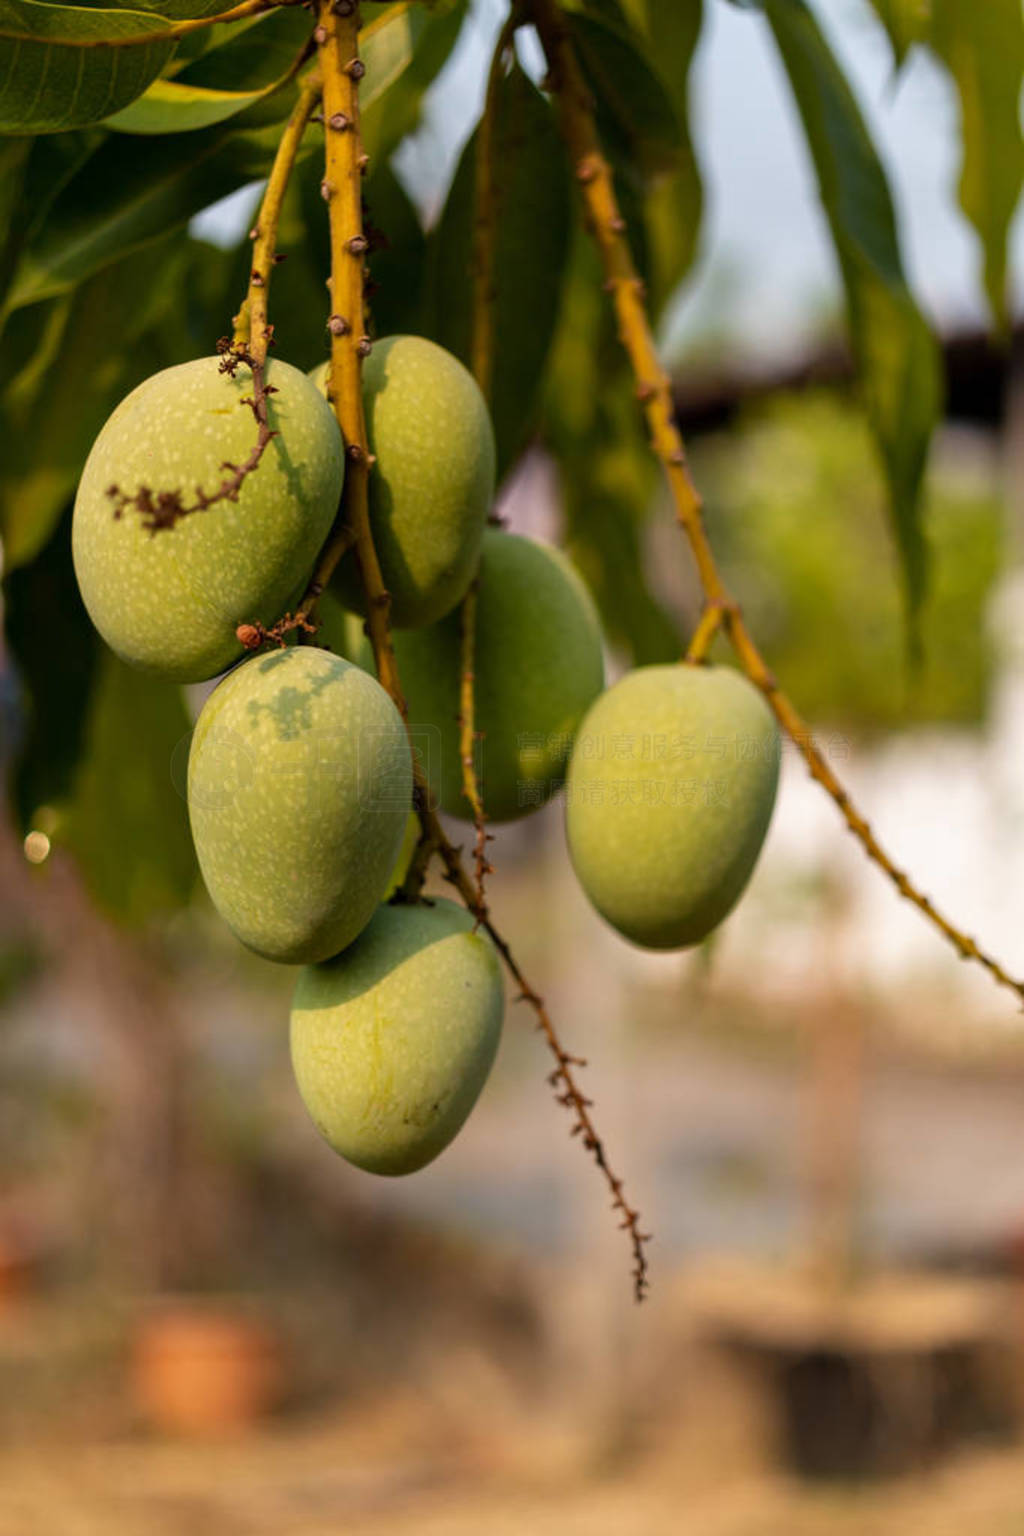 Raw wild green mangoes hanging on branch, close-up